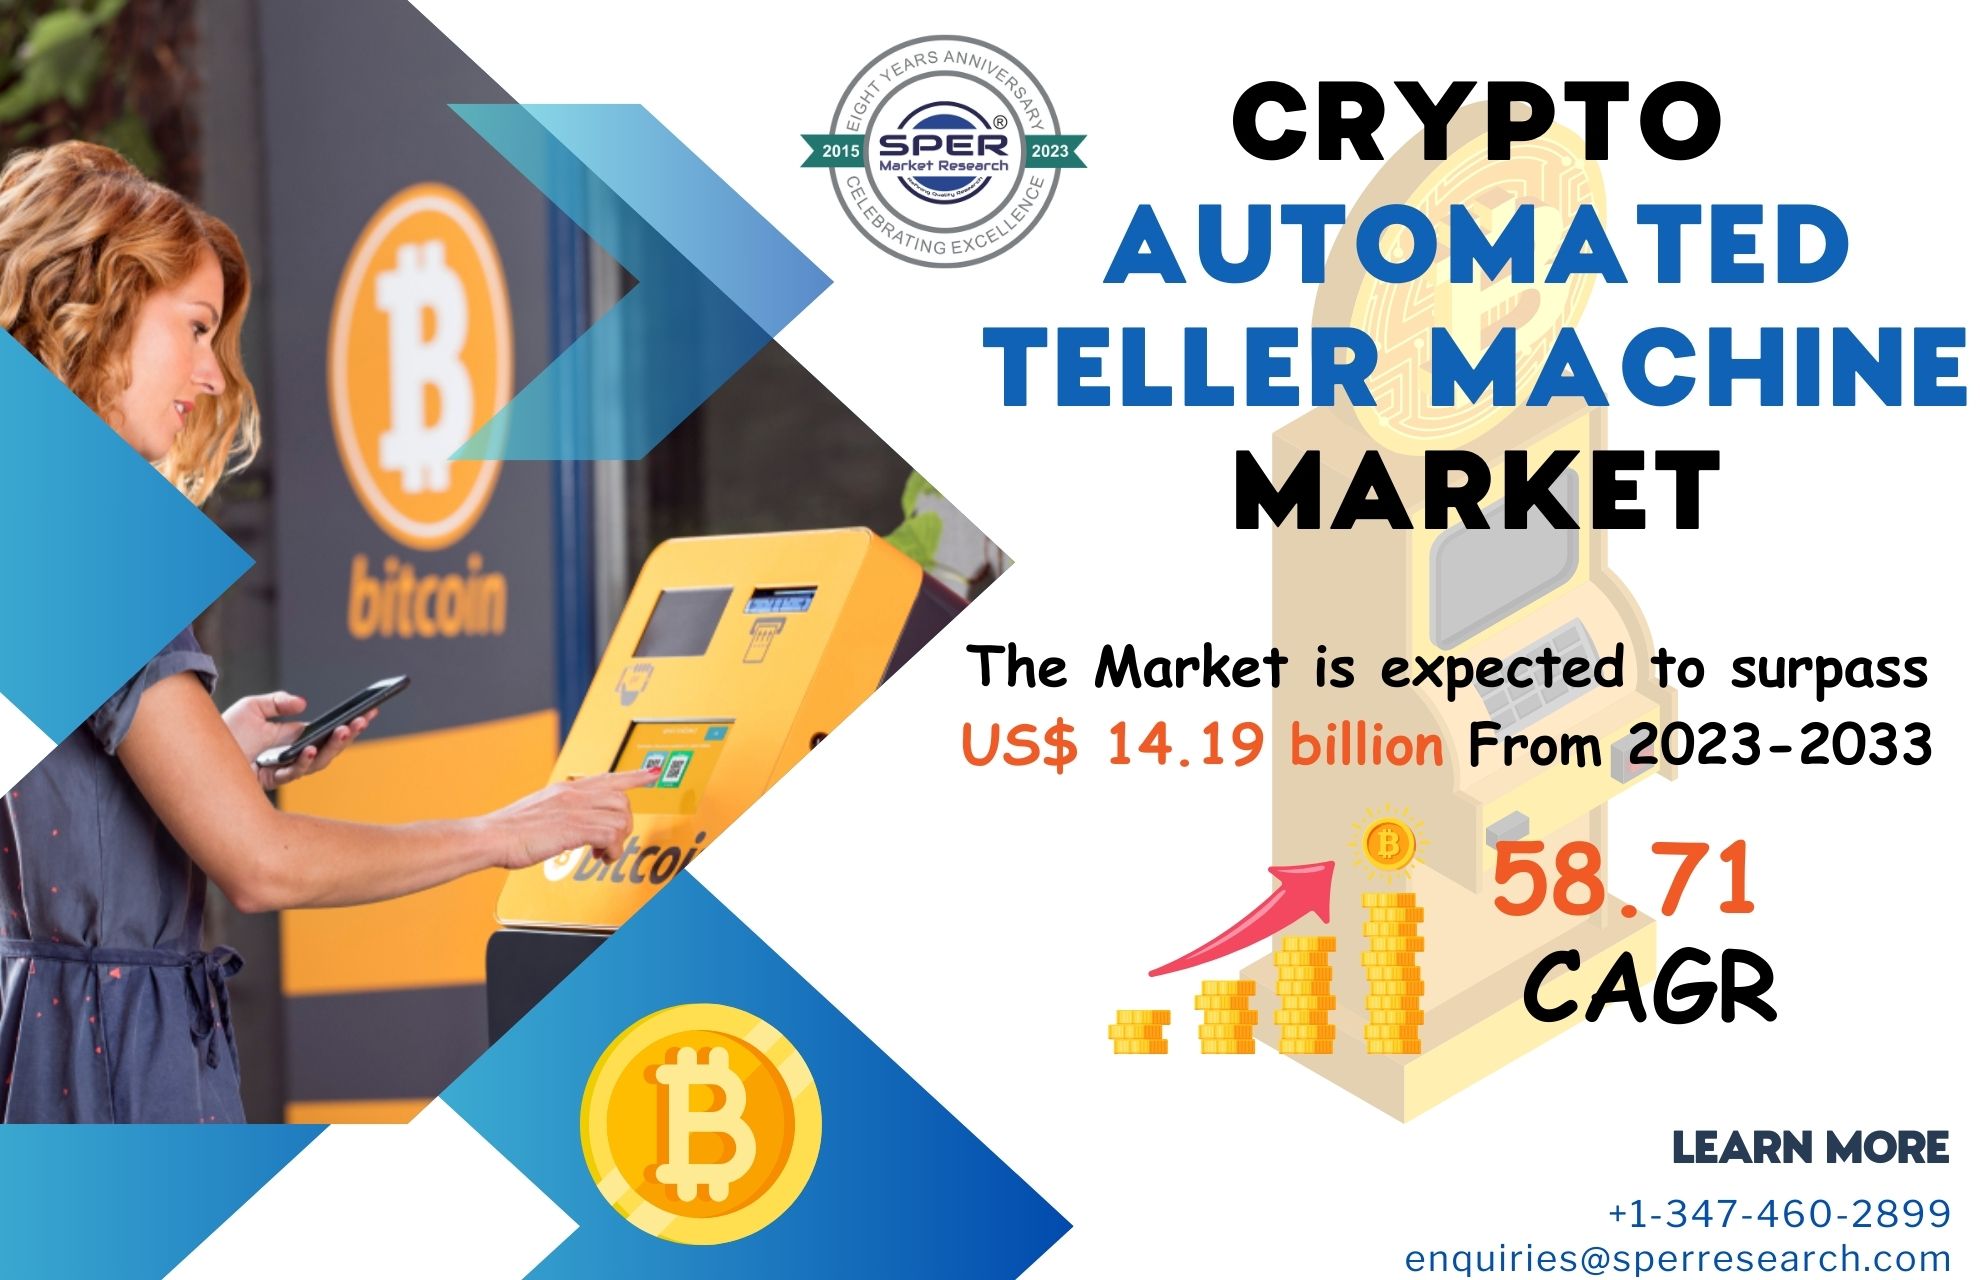 Crypto ATM Market Trends 2023- Industry Share, Revenue, Growth Drivers, CAGR Status, Business Opportunities, Challenges and Future Strategies Till 2033: SPER Market Research